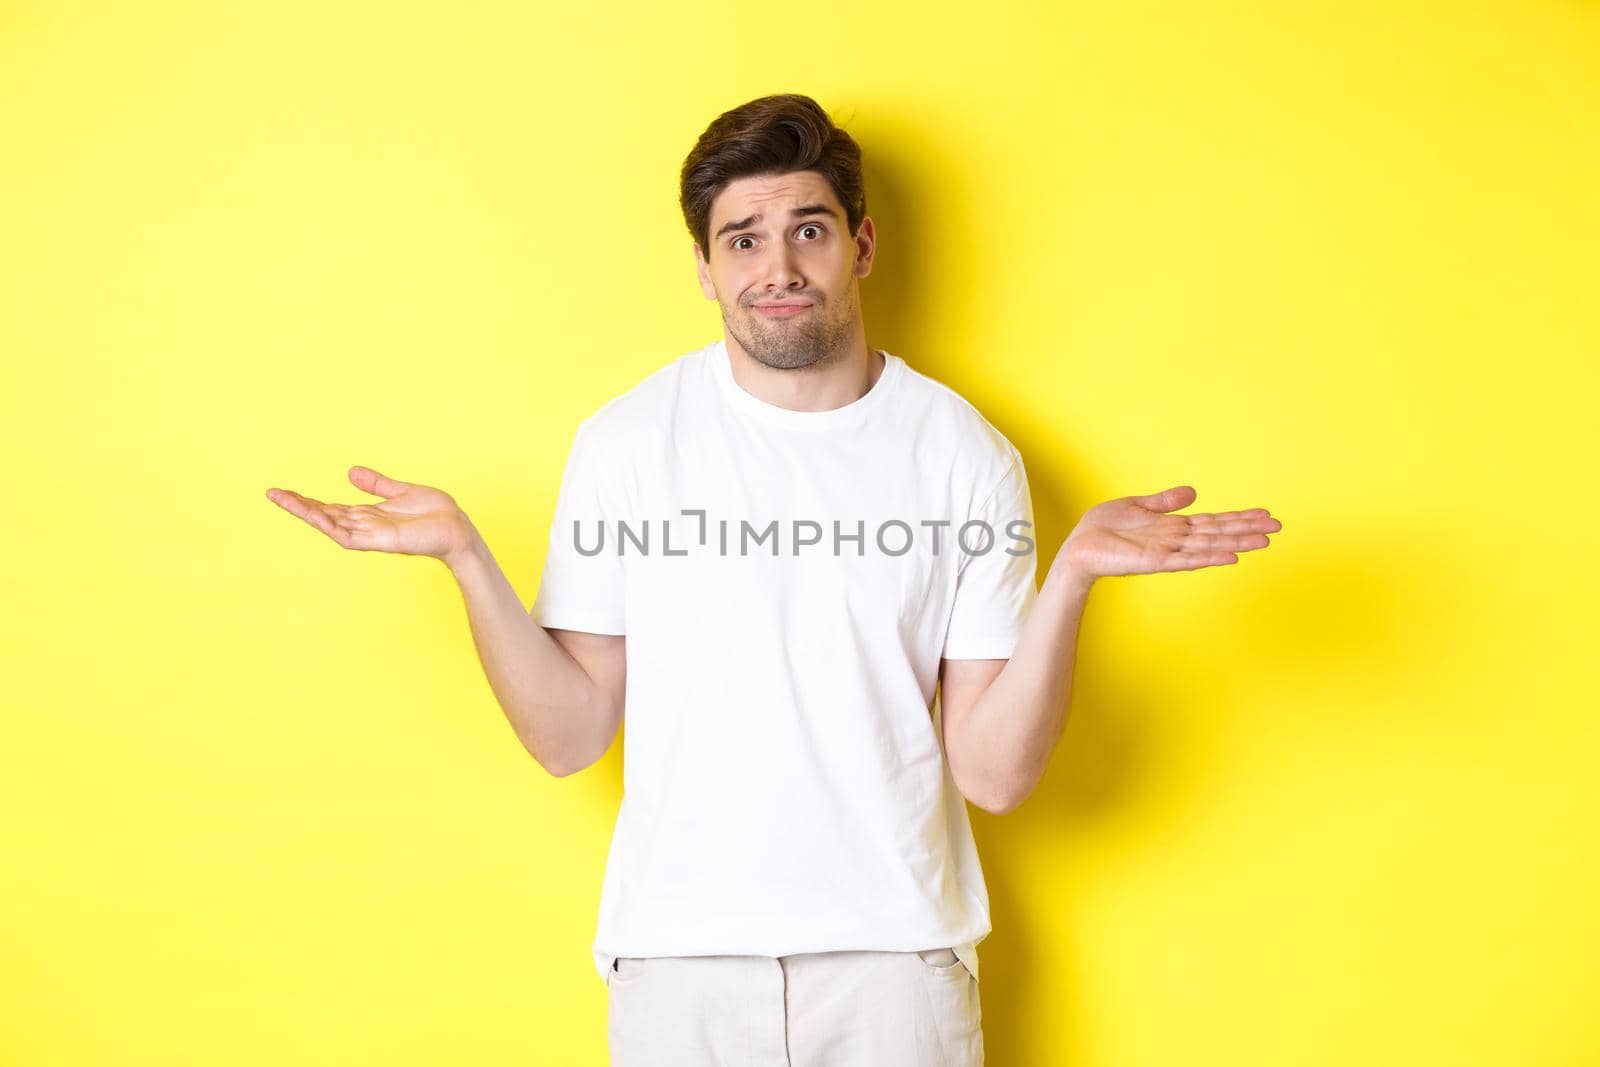 Clueless man in white t-shirt, shrugging and looking puzzled, dont know anything, standing over yellow background.